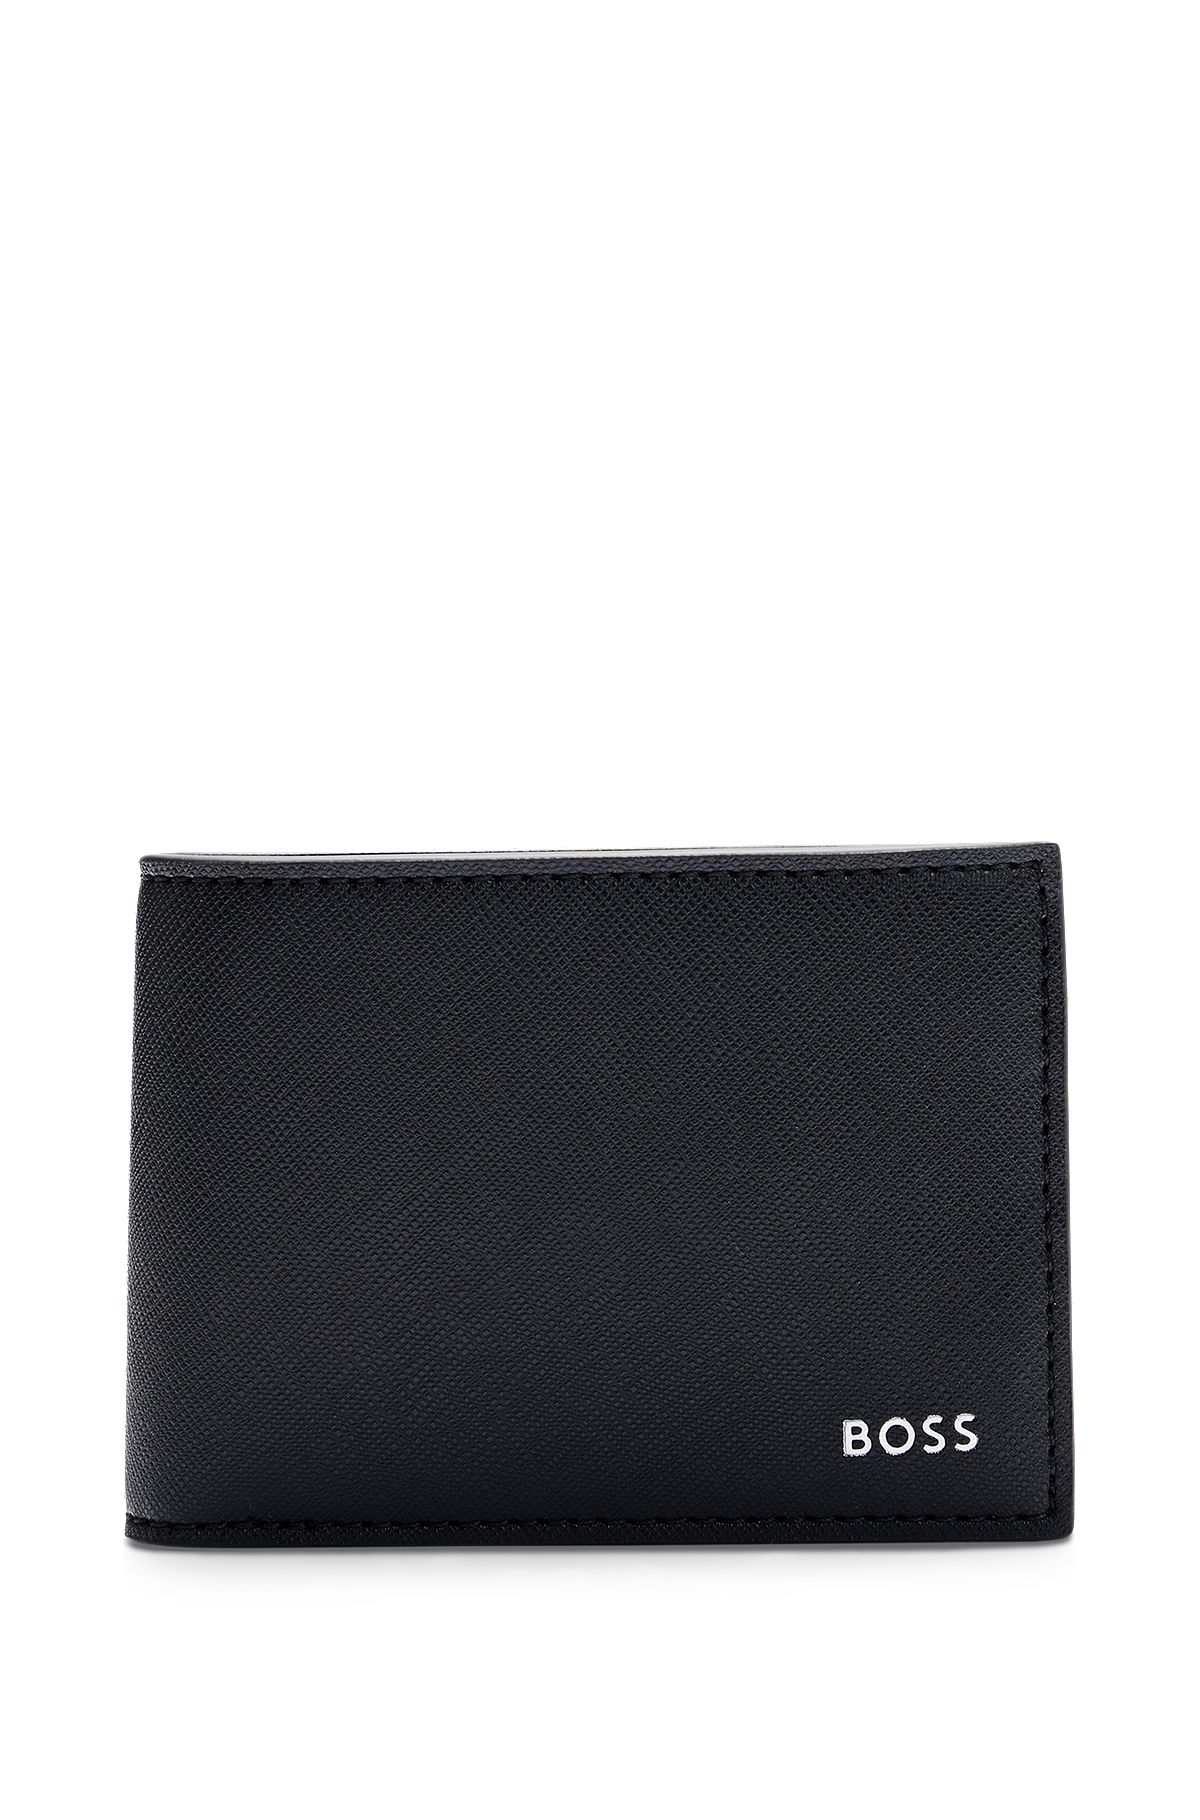 Structured folding wallet with logo, Black